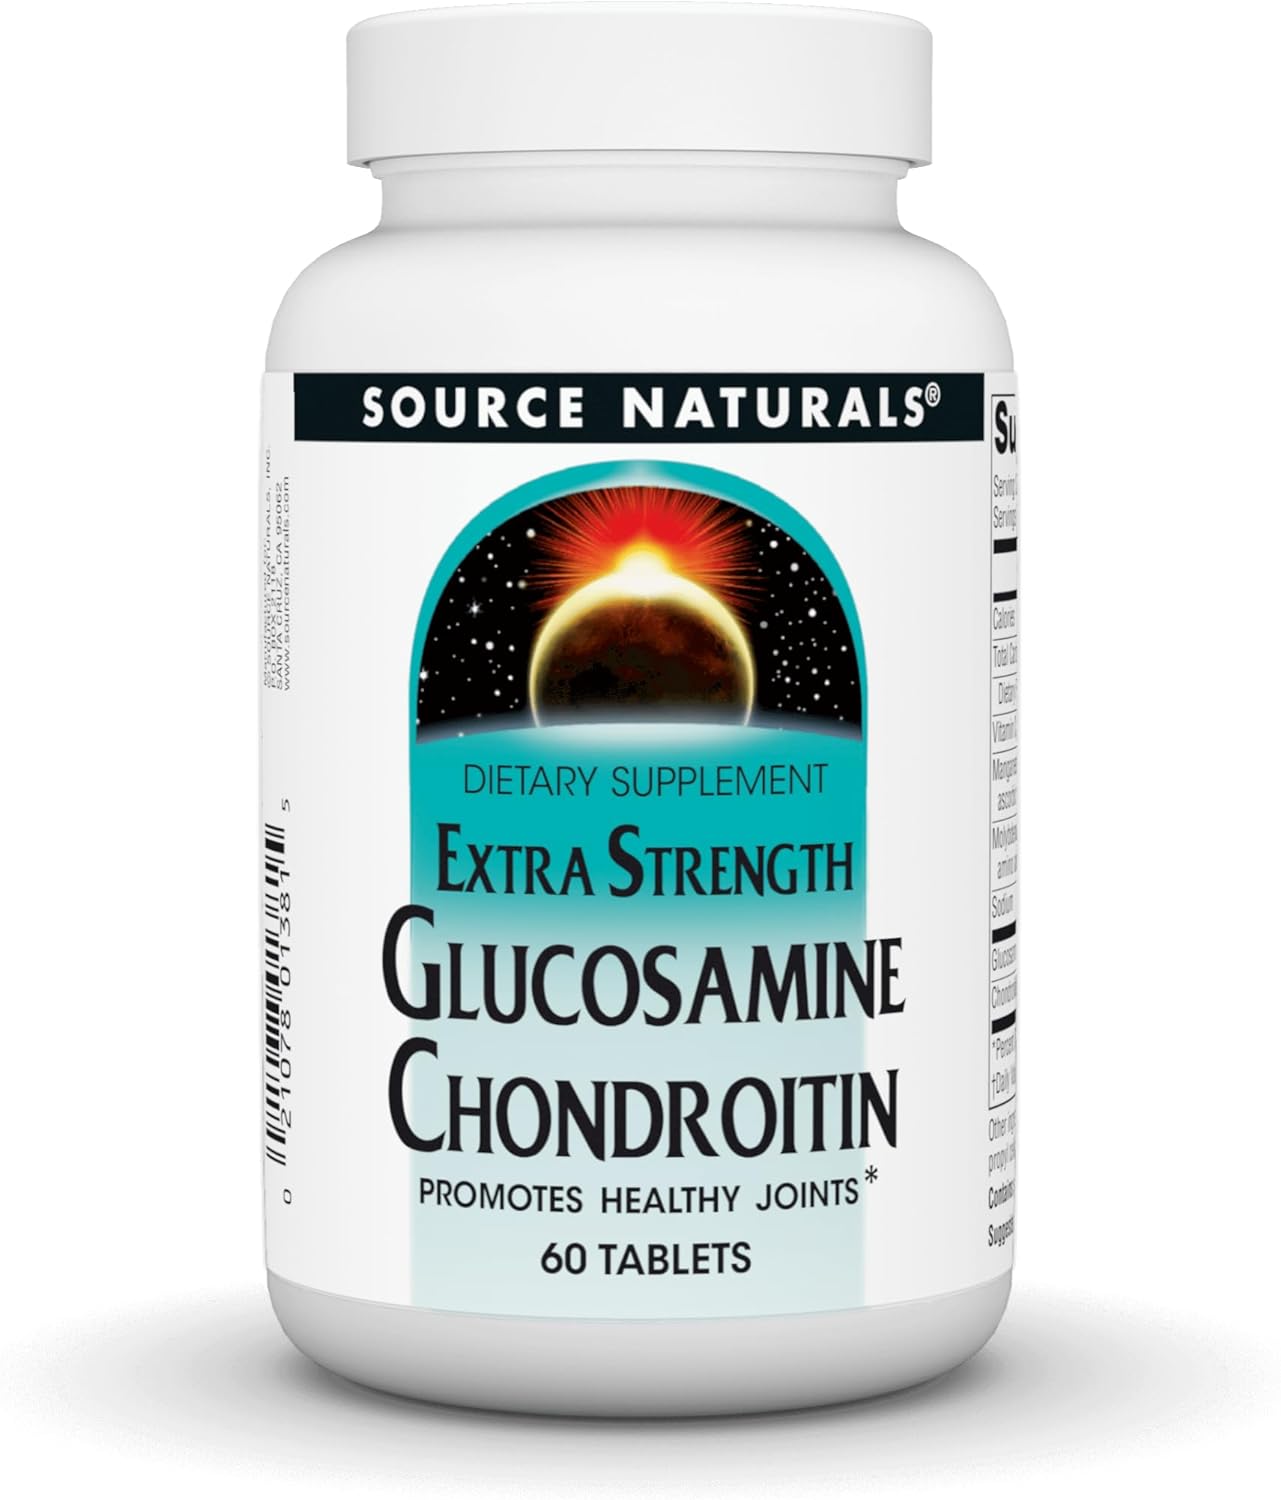 Source Naturals Extra Strength Glucosamine Chondroitin, Promotes Healthy Joints*, 60 Tablets